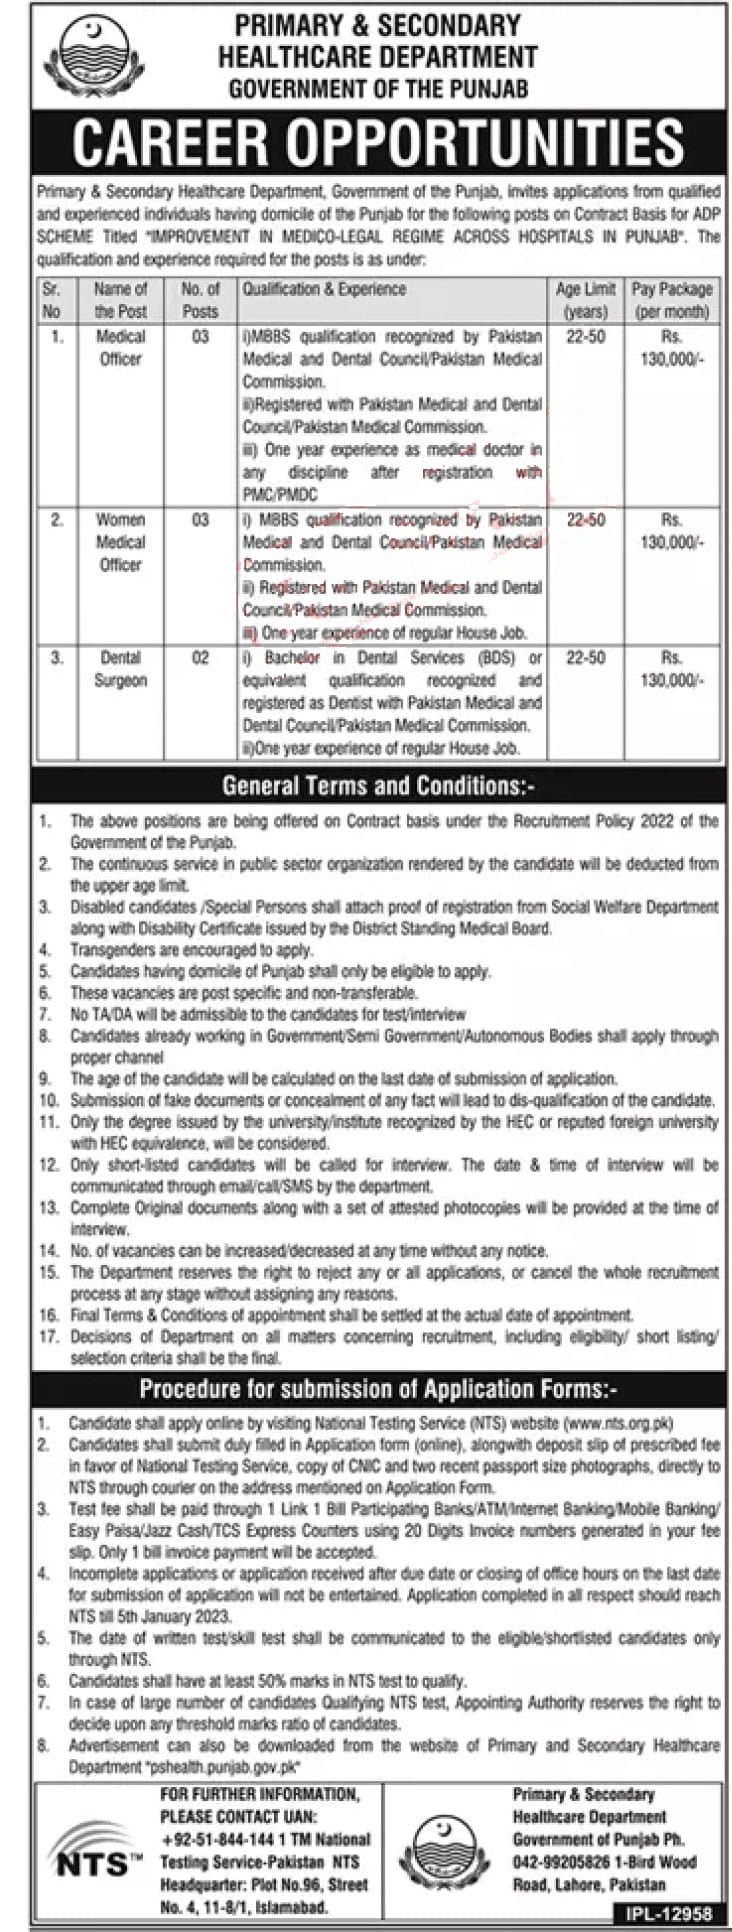 Latest Primary and Secondary Healthcare Department Punjab Jobs 2022 